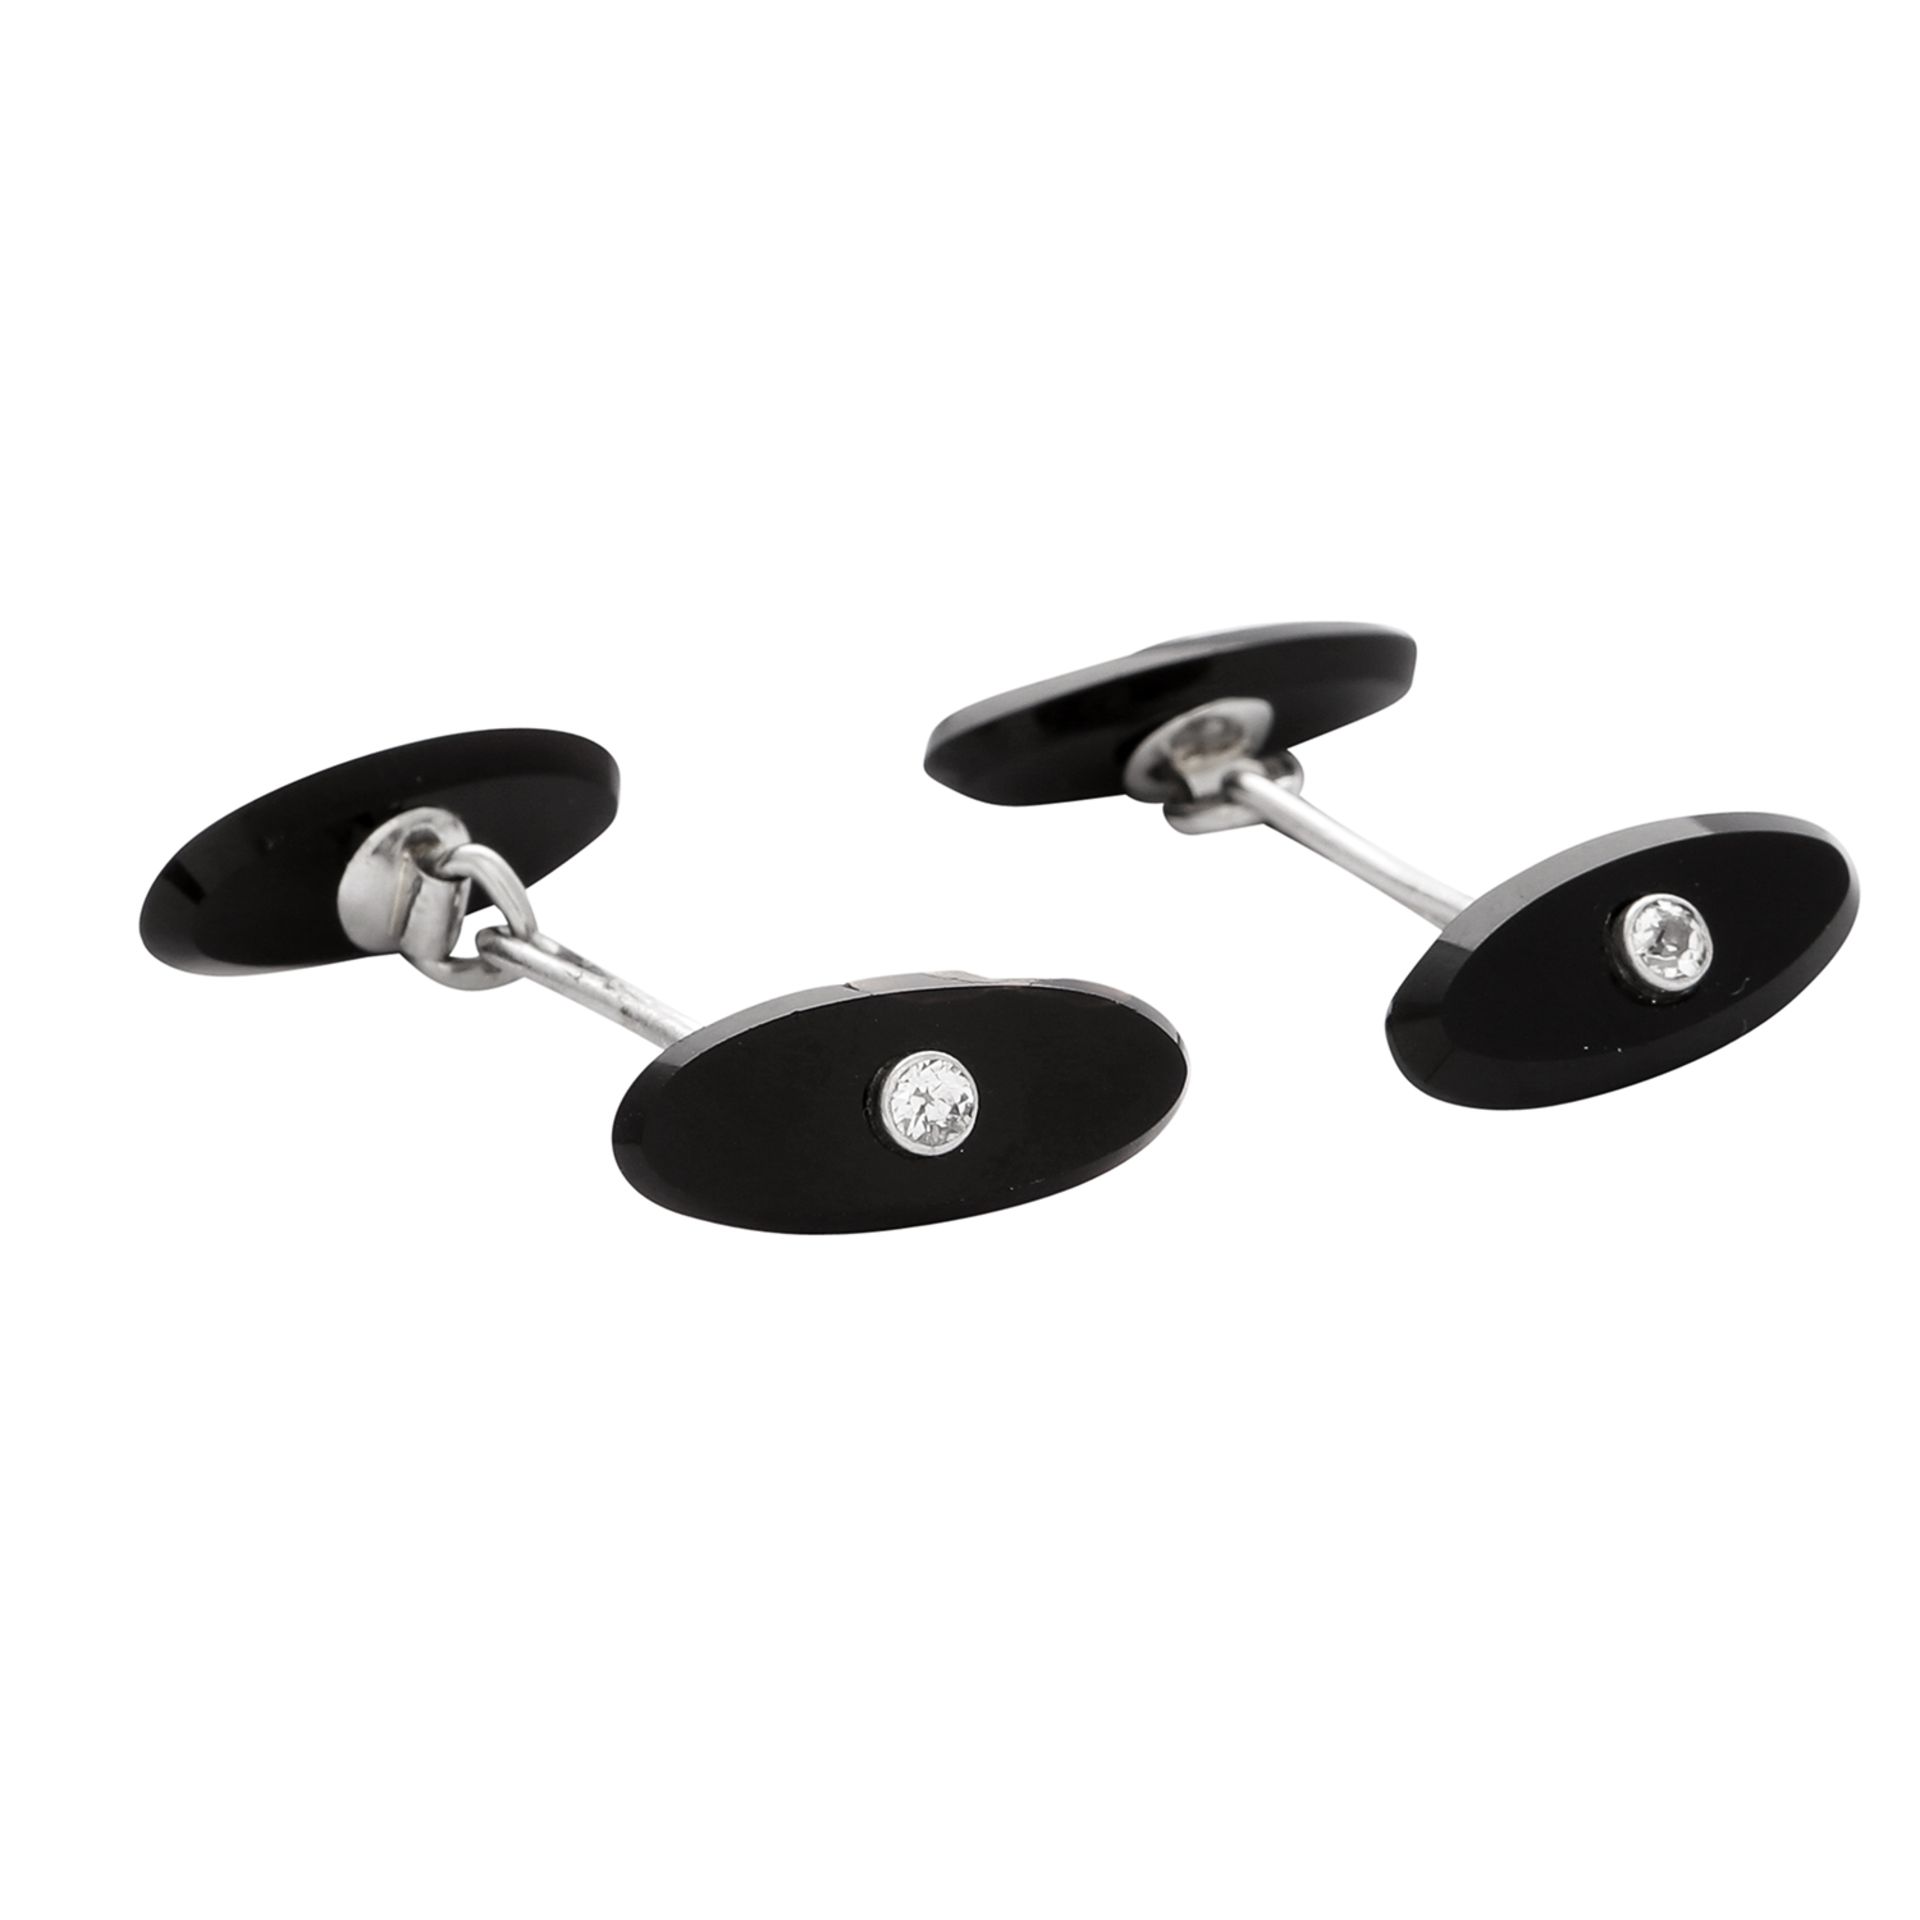 A PAIR OF ART DECO DIAMOND AND ONYX CUFFLINKS in platinum, each formed of two elongated oval